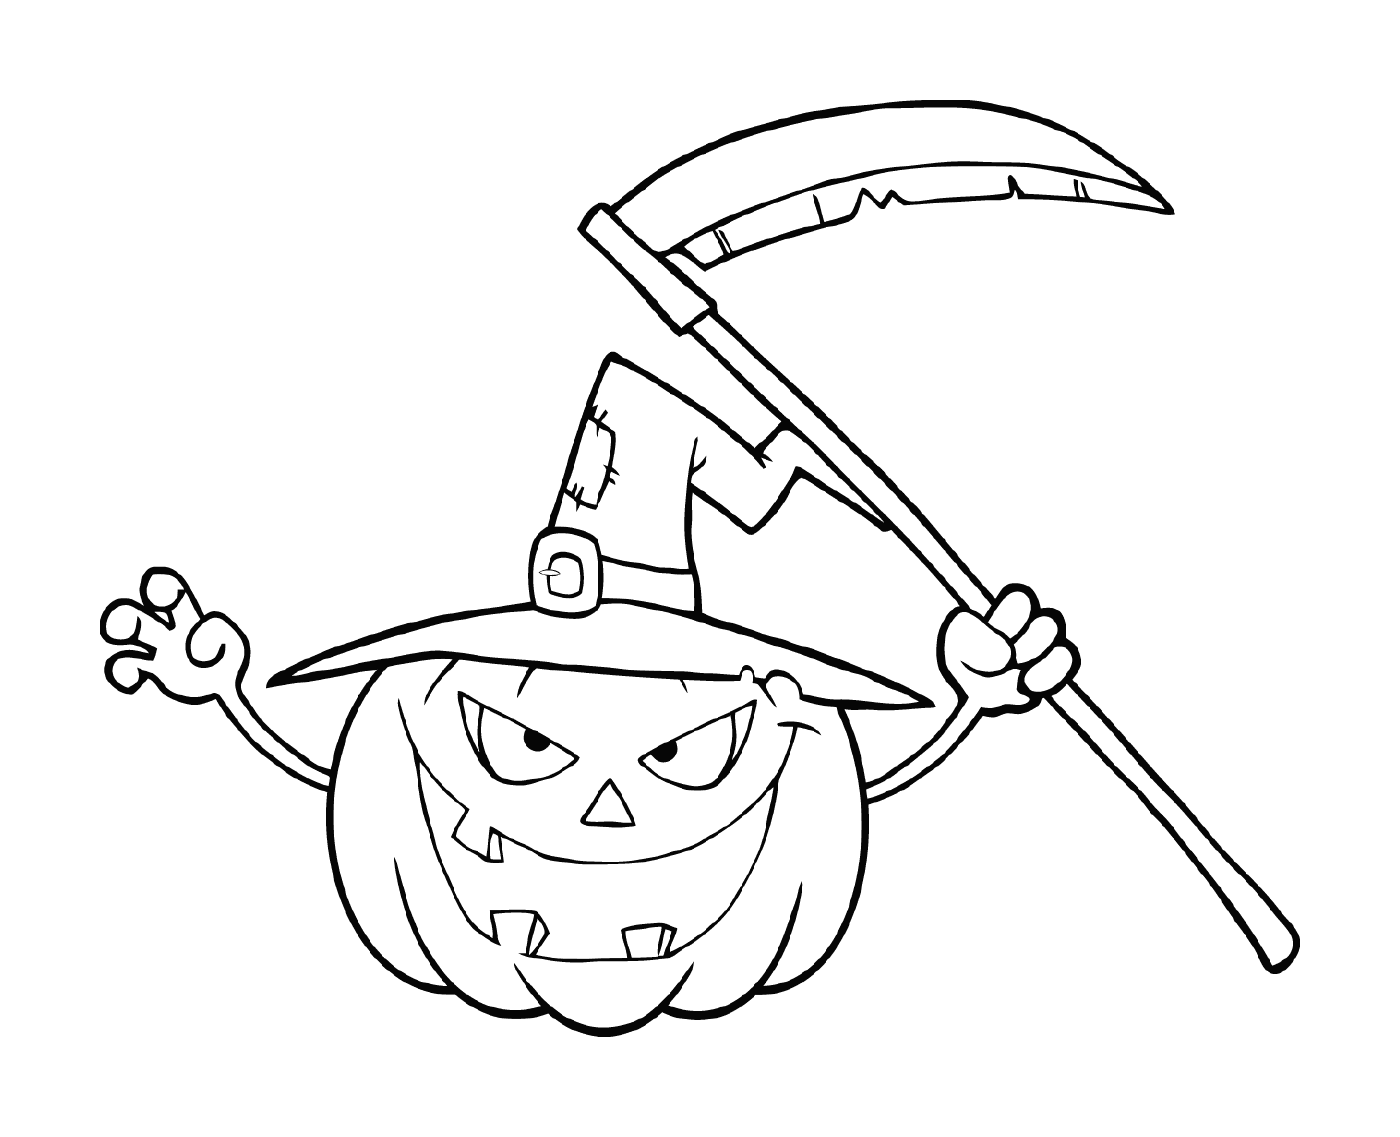  Halloween pumpkin with a witch hat 